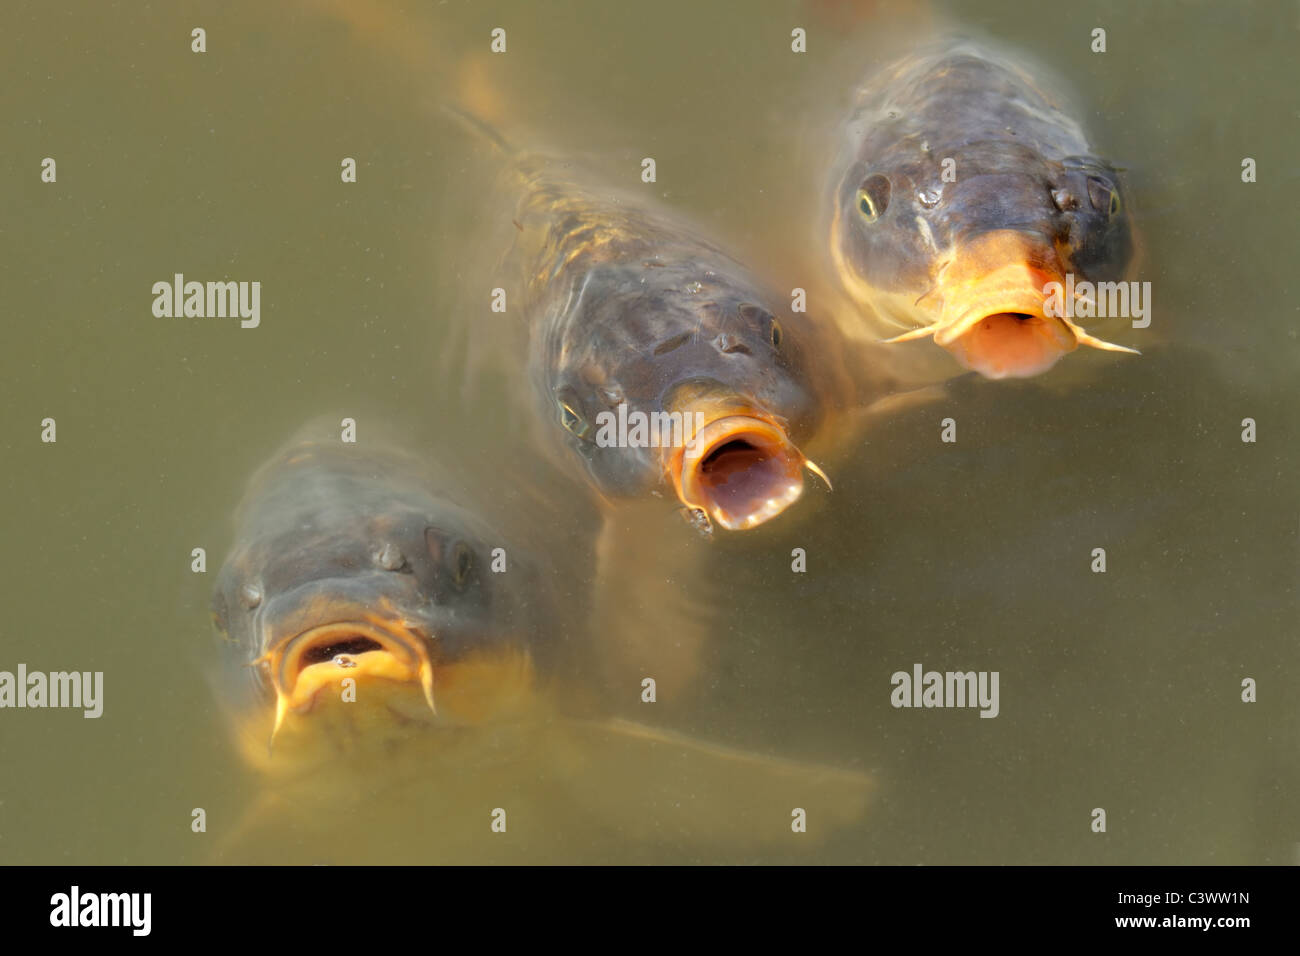 Koi fish with open mouths waiting to be fed Stock Photo